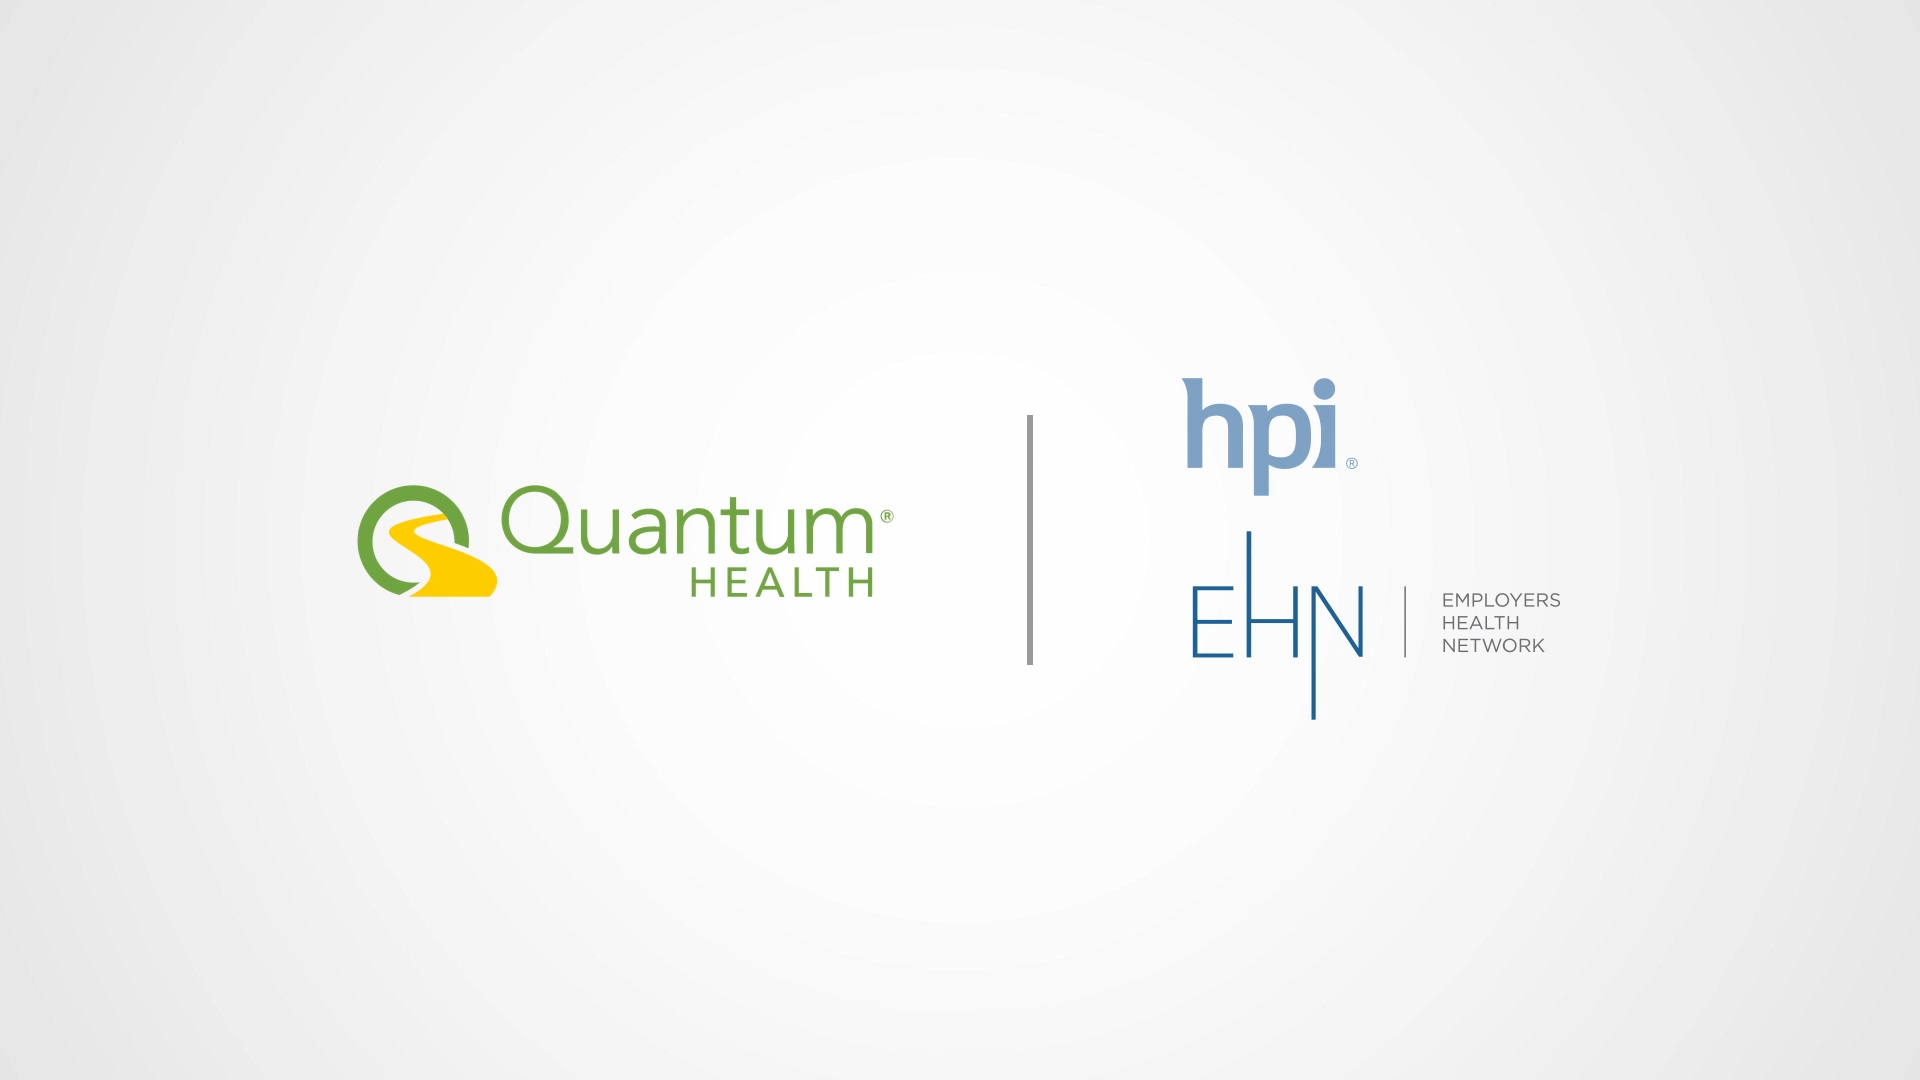 Quantum Health Joins With HPI and Employers Health Network to Offer New Healthcare Navigation and High-Performance Networks Platform to Self-Insured Employers